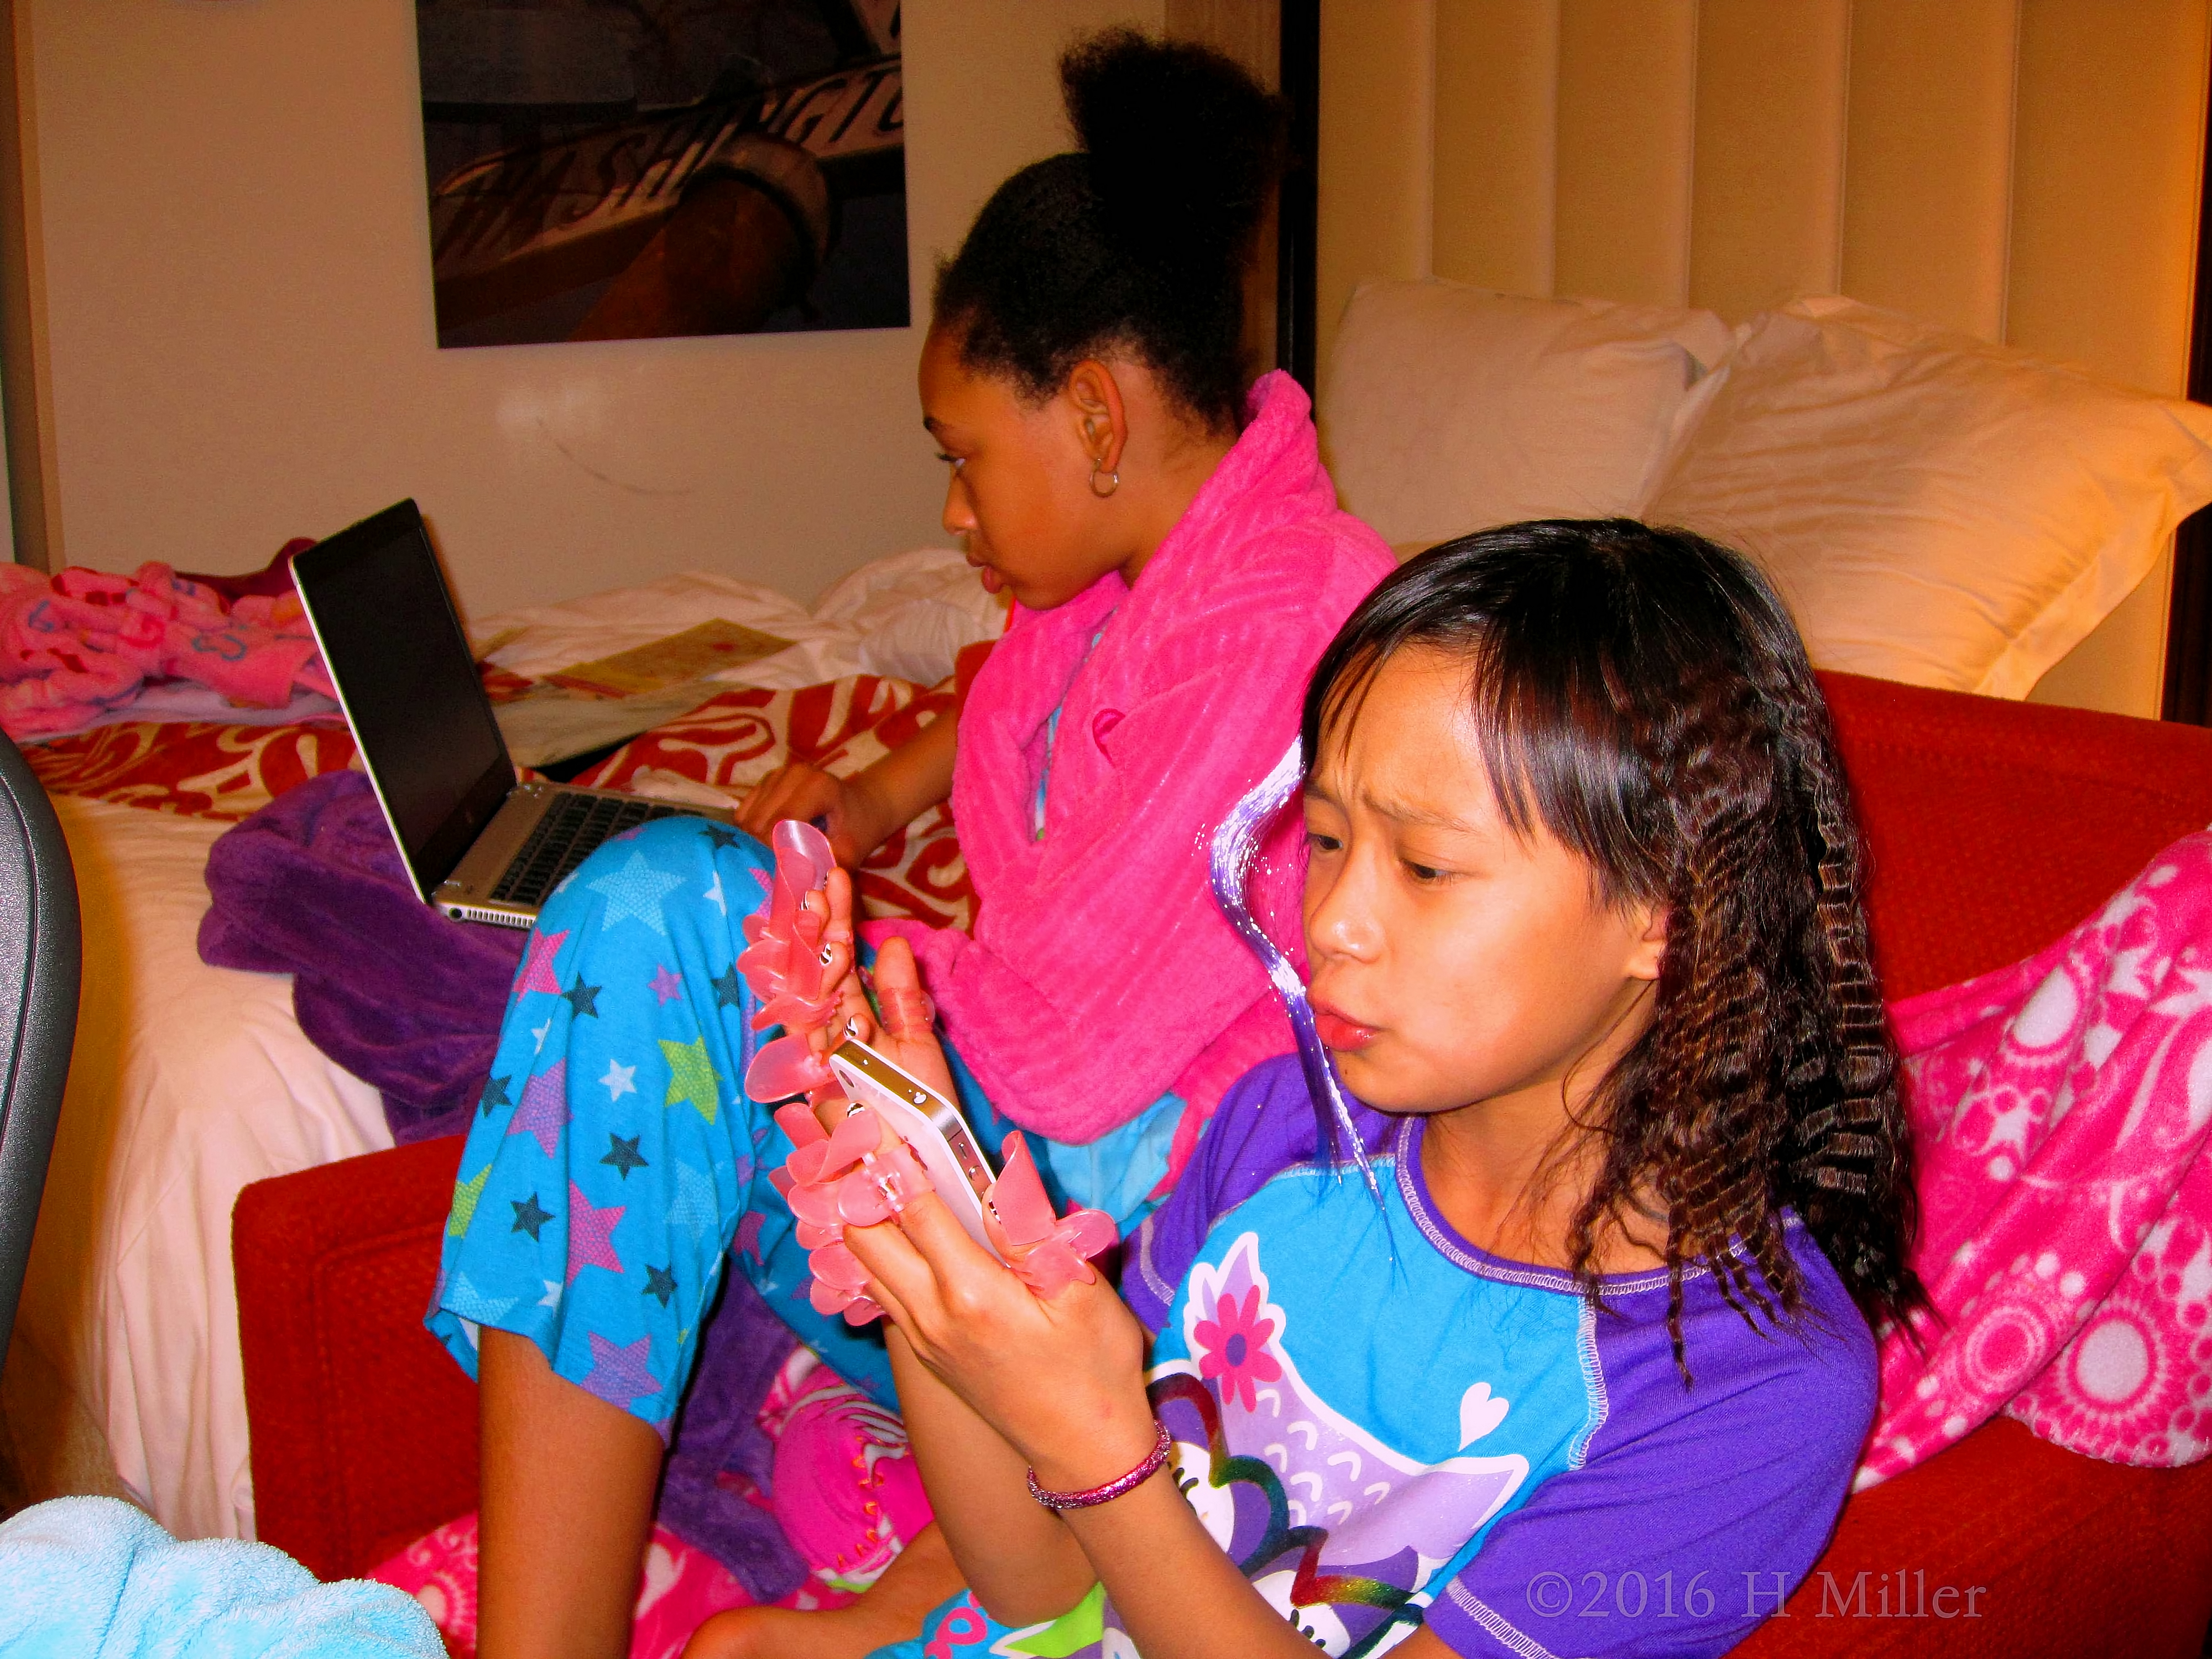 Mei Li And Spa Guest On Their Technology Devices During A Party Break! 